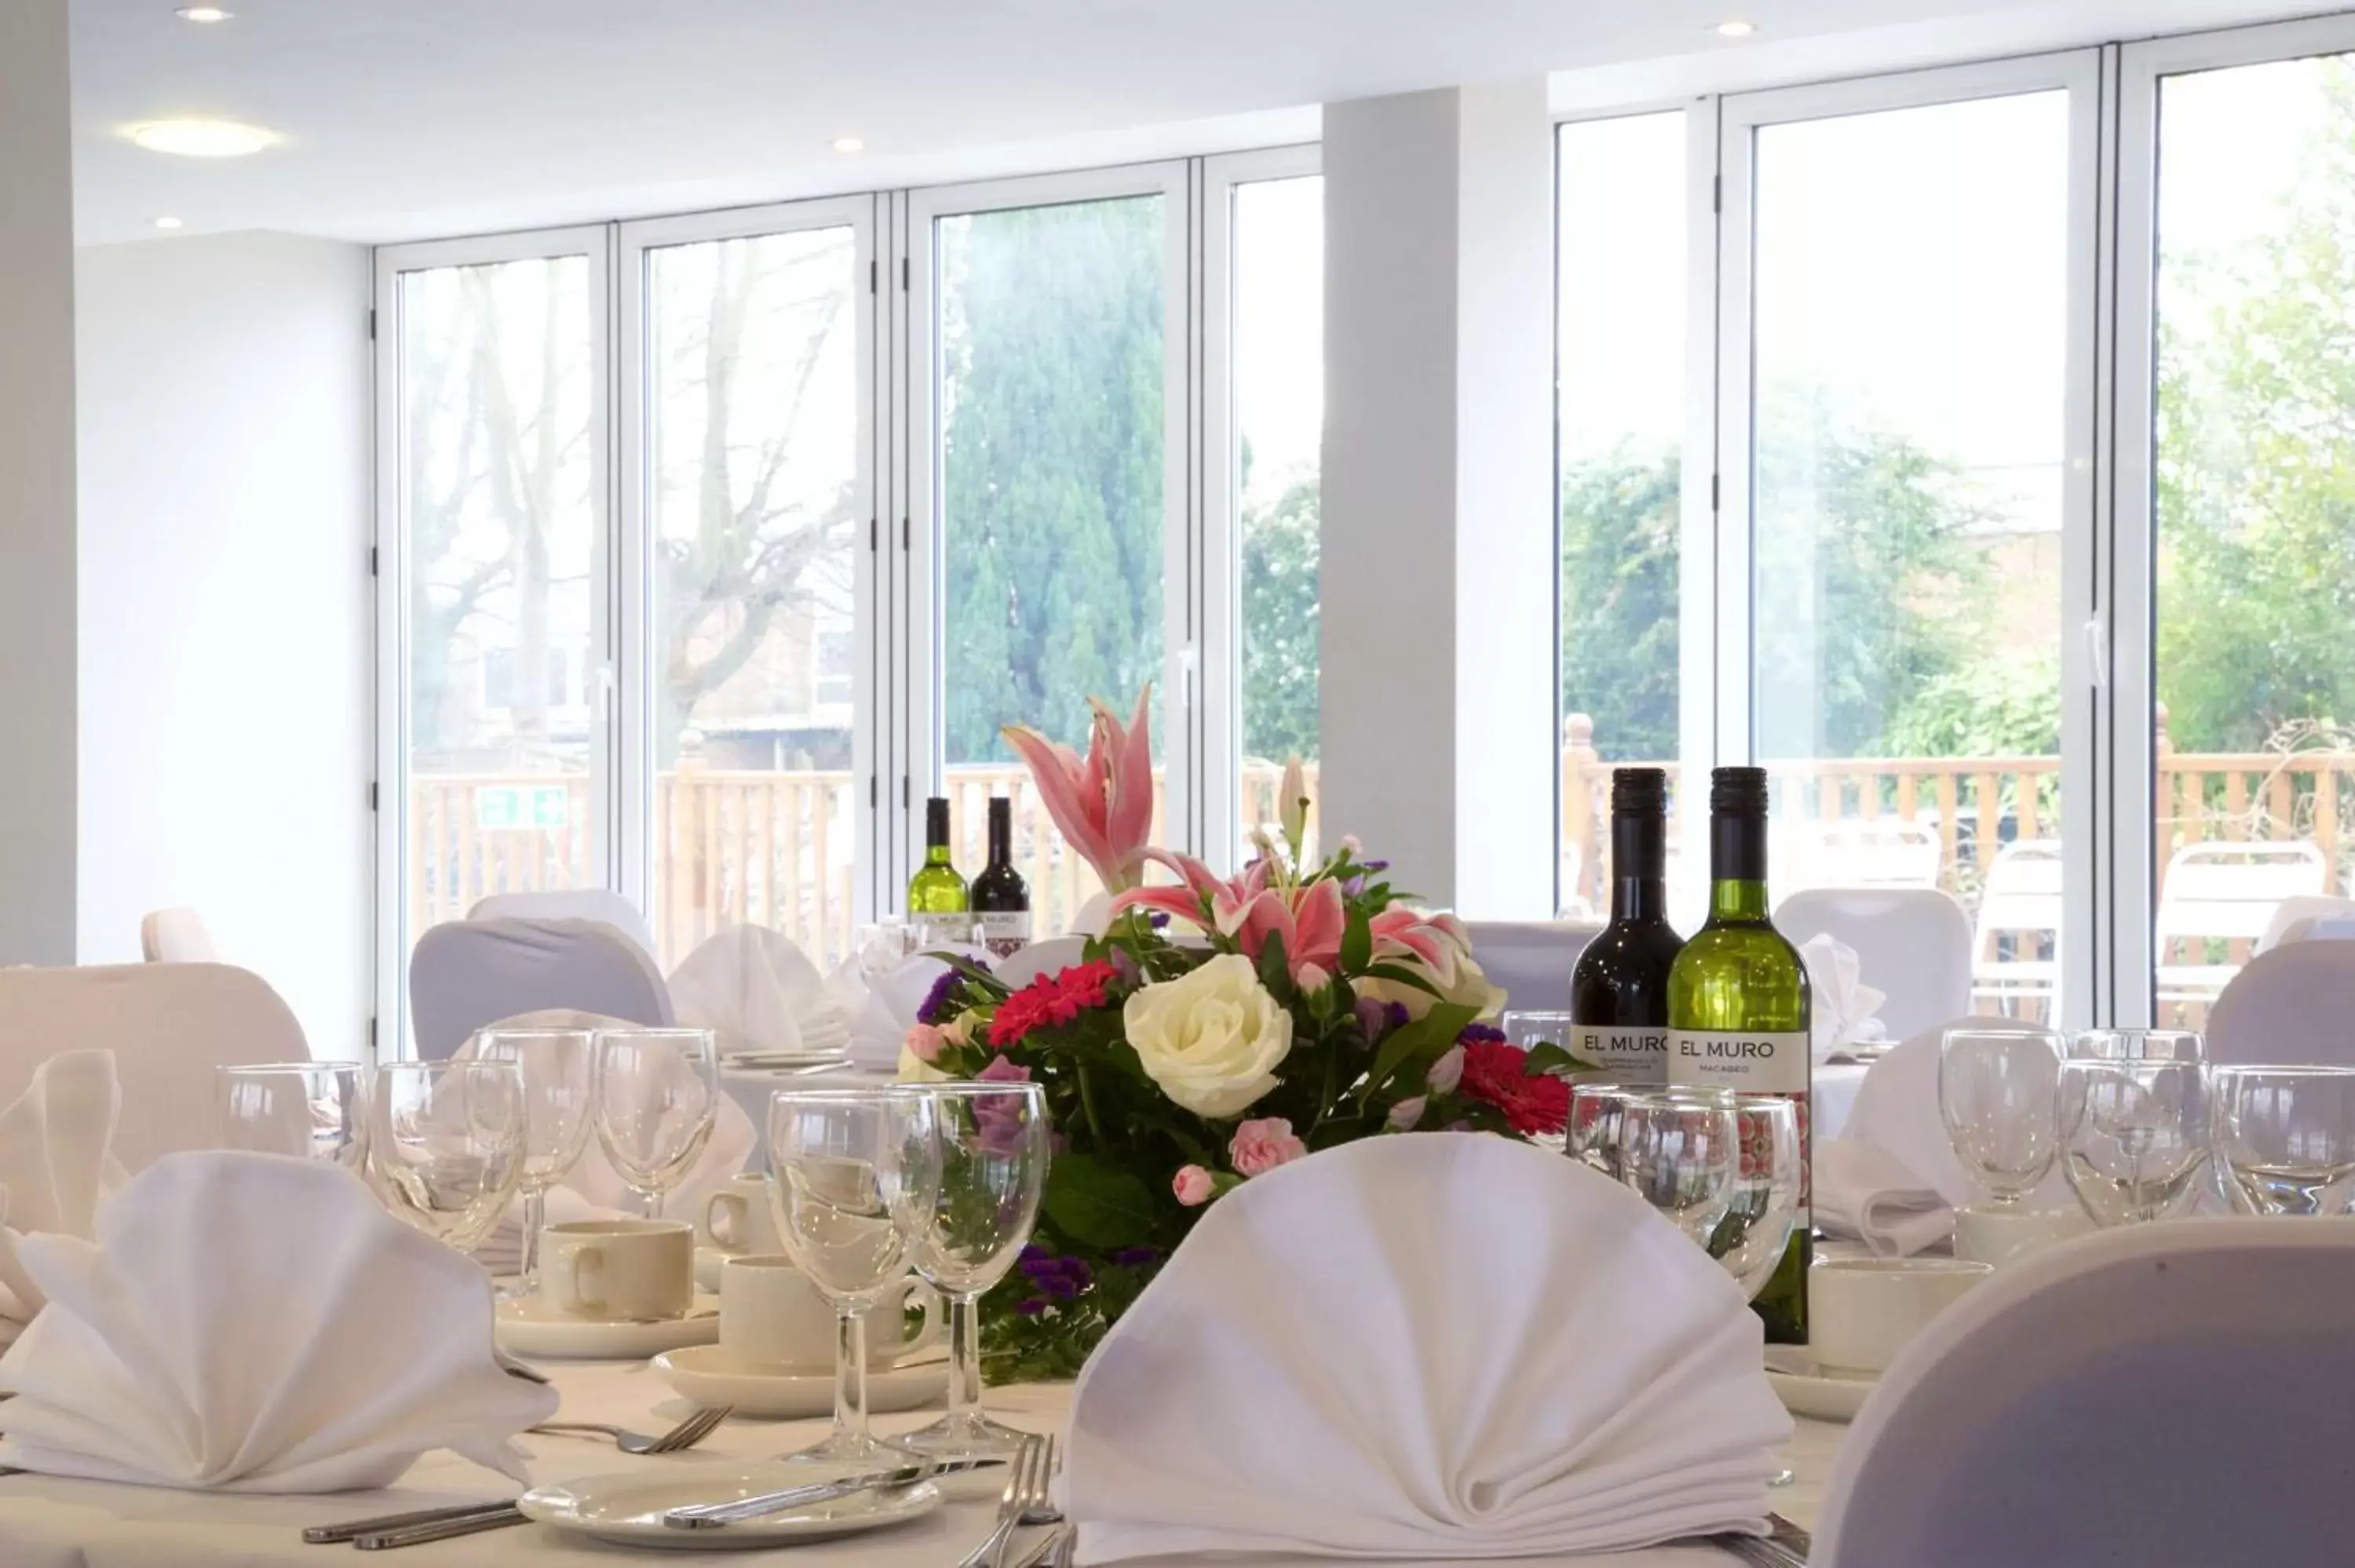 Other, Banquet Facilities in London Croydon Aerodrome Hotel, BW Signature Collection